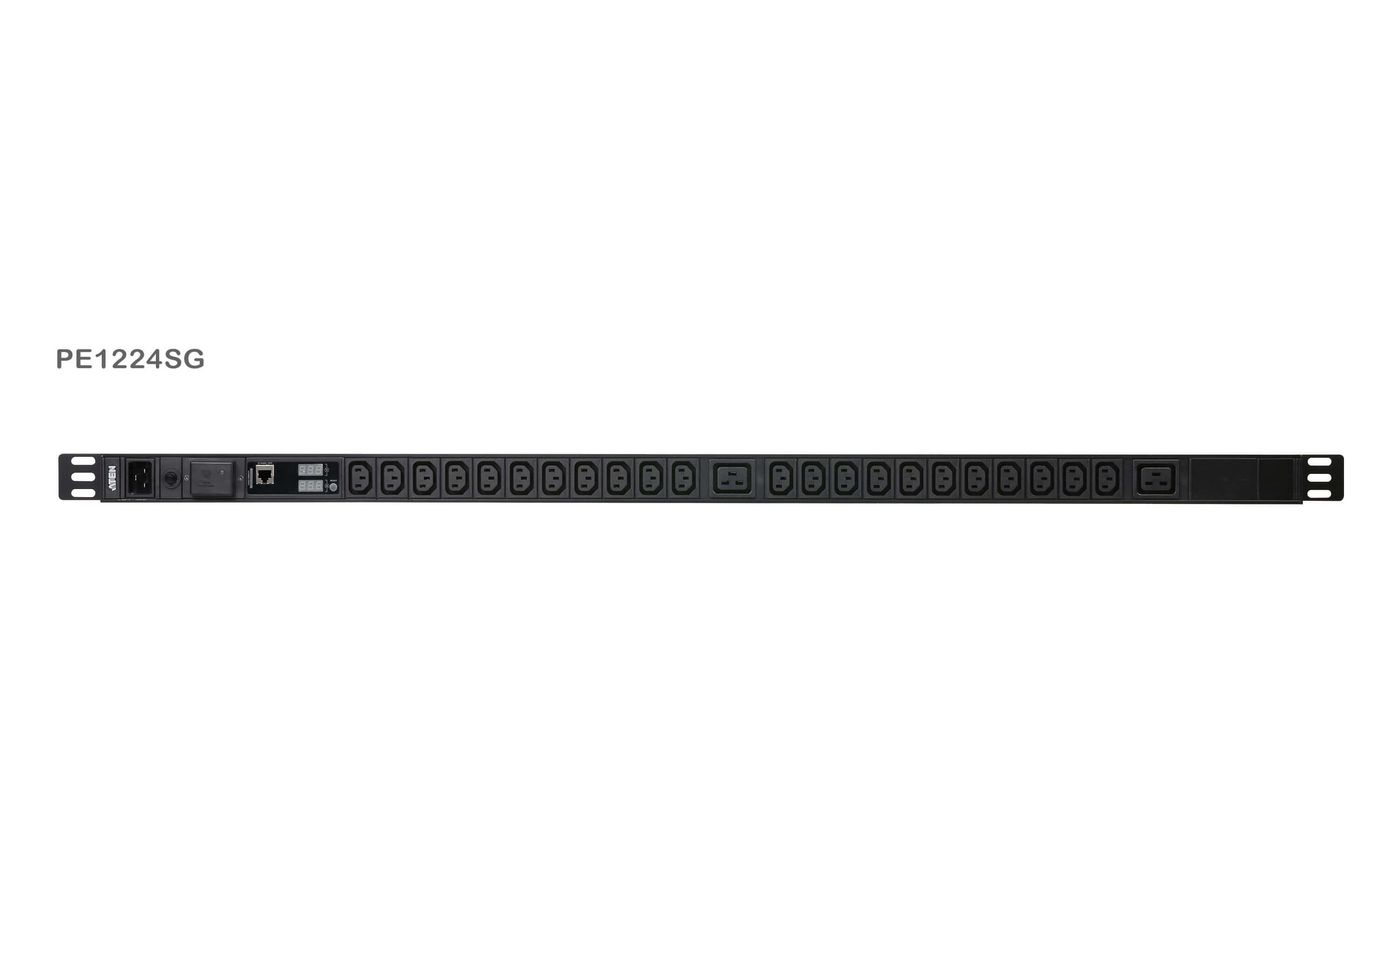 Aten PE1224SG-AT-G W127285139 24-Outlet 0U PDU with Current 